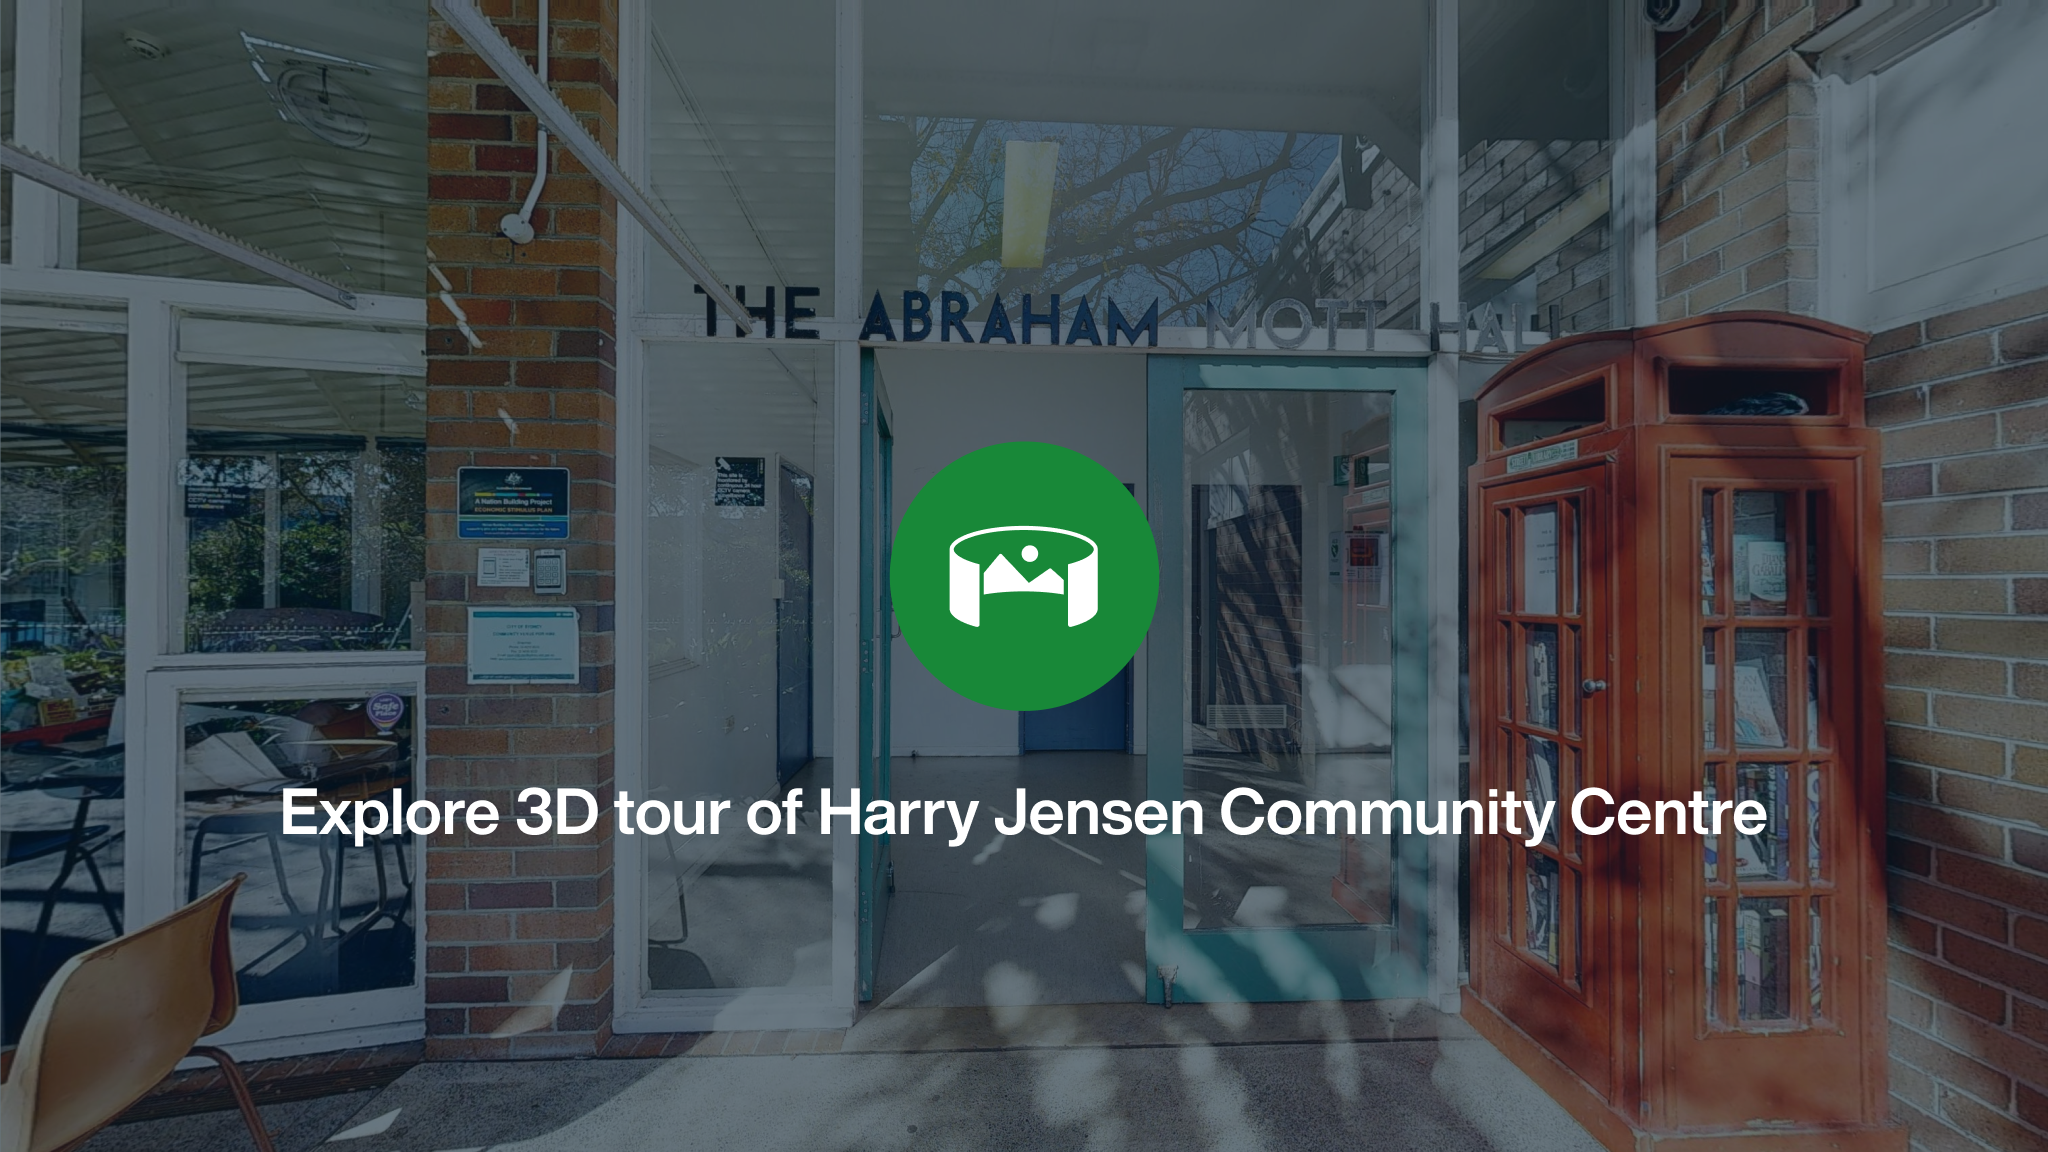 The front entrance to Harry Jensen Community Centre overlayed with a green icon and the words Explore 3D tour of Harry Jensen Community Centre.